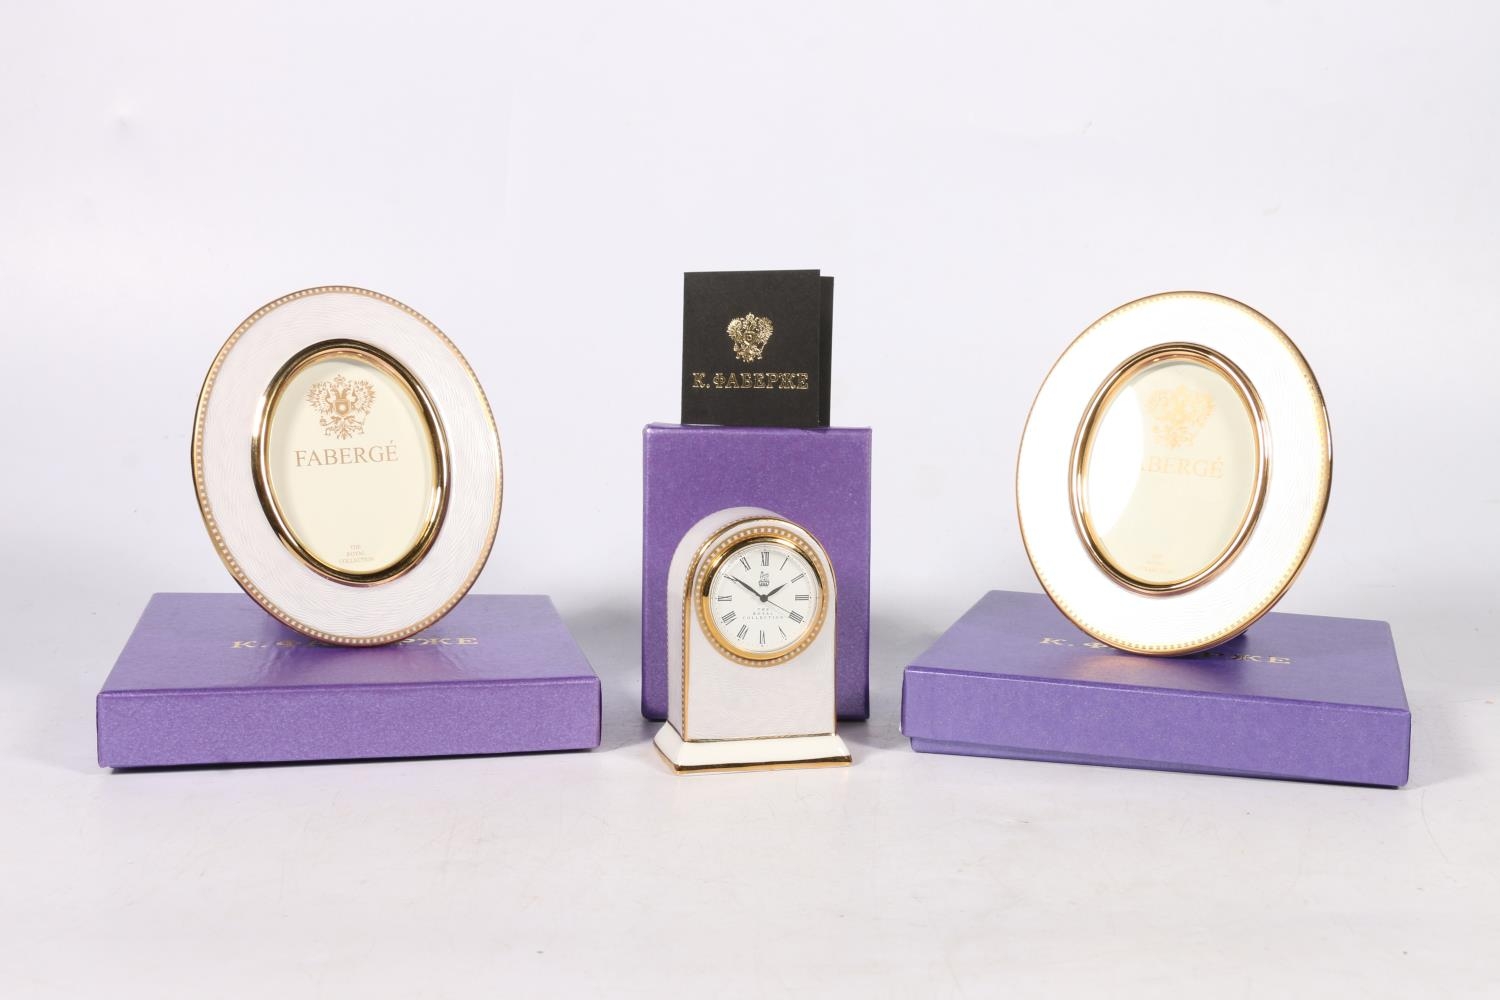 English Fine Bone China, 'The Royal Collection Fabergé' boudoir clock decorated with imitation